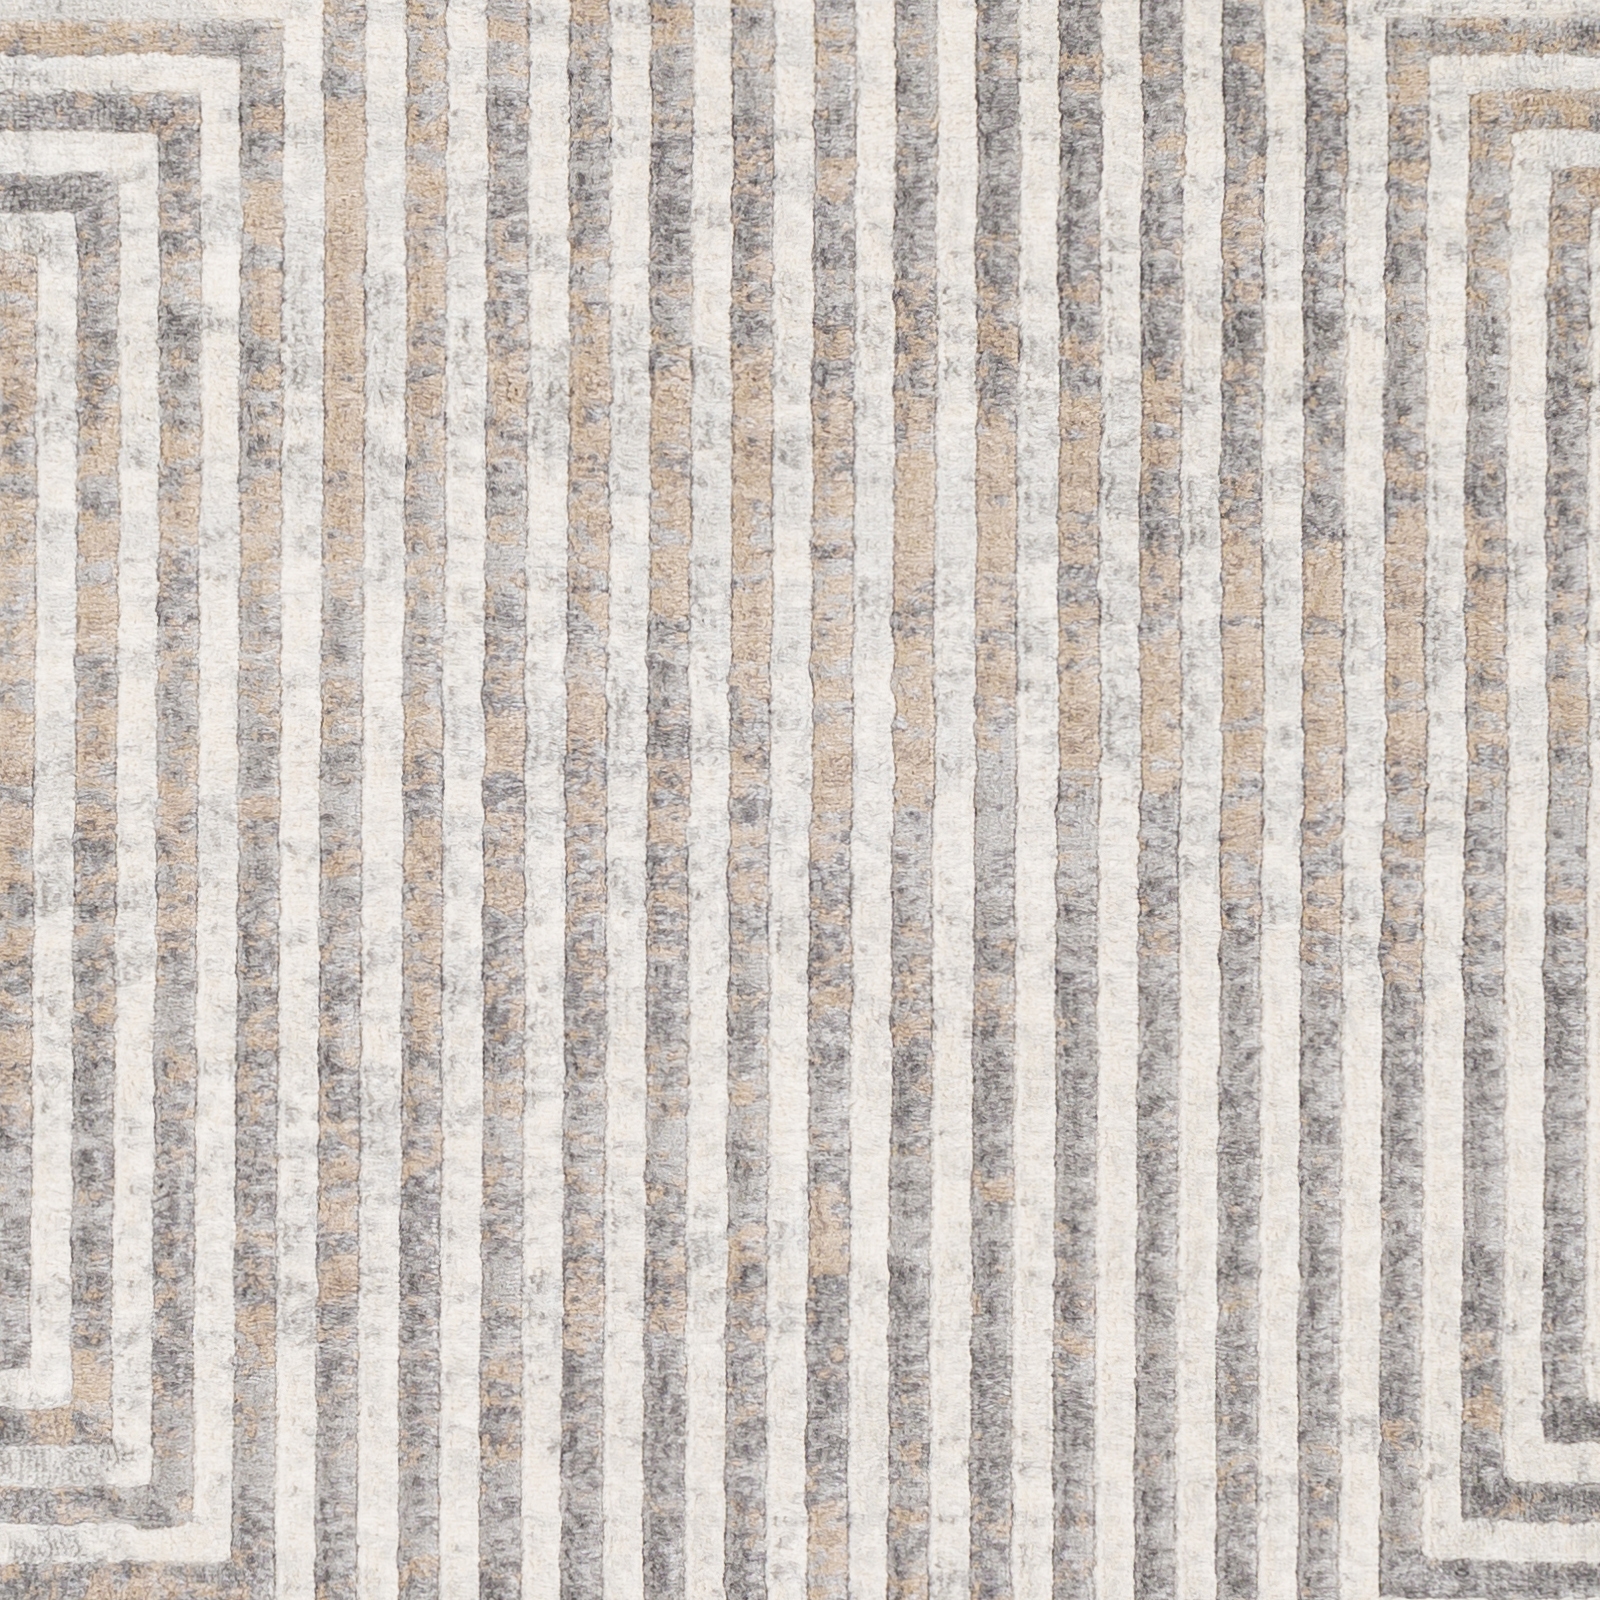 Remy Rug, 5'3" x 7'3" - Image 5